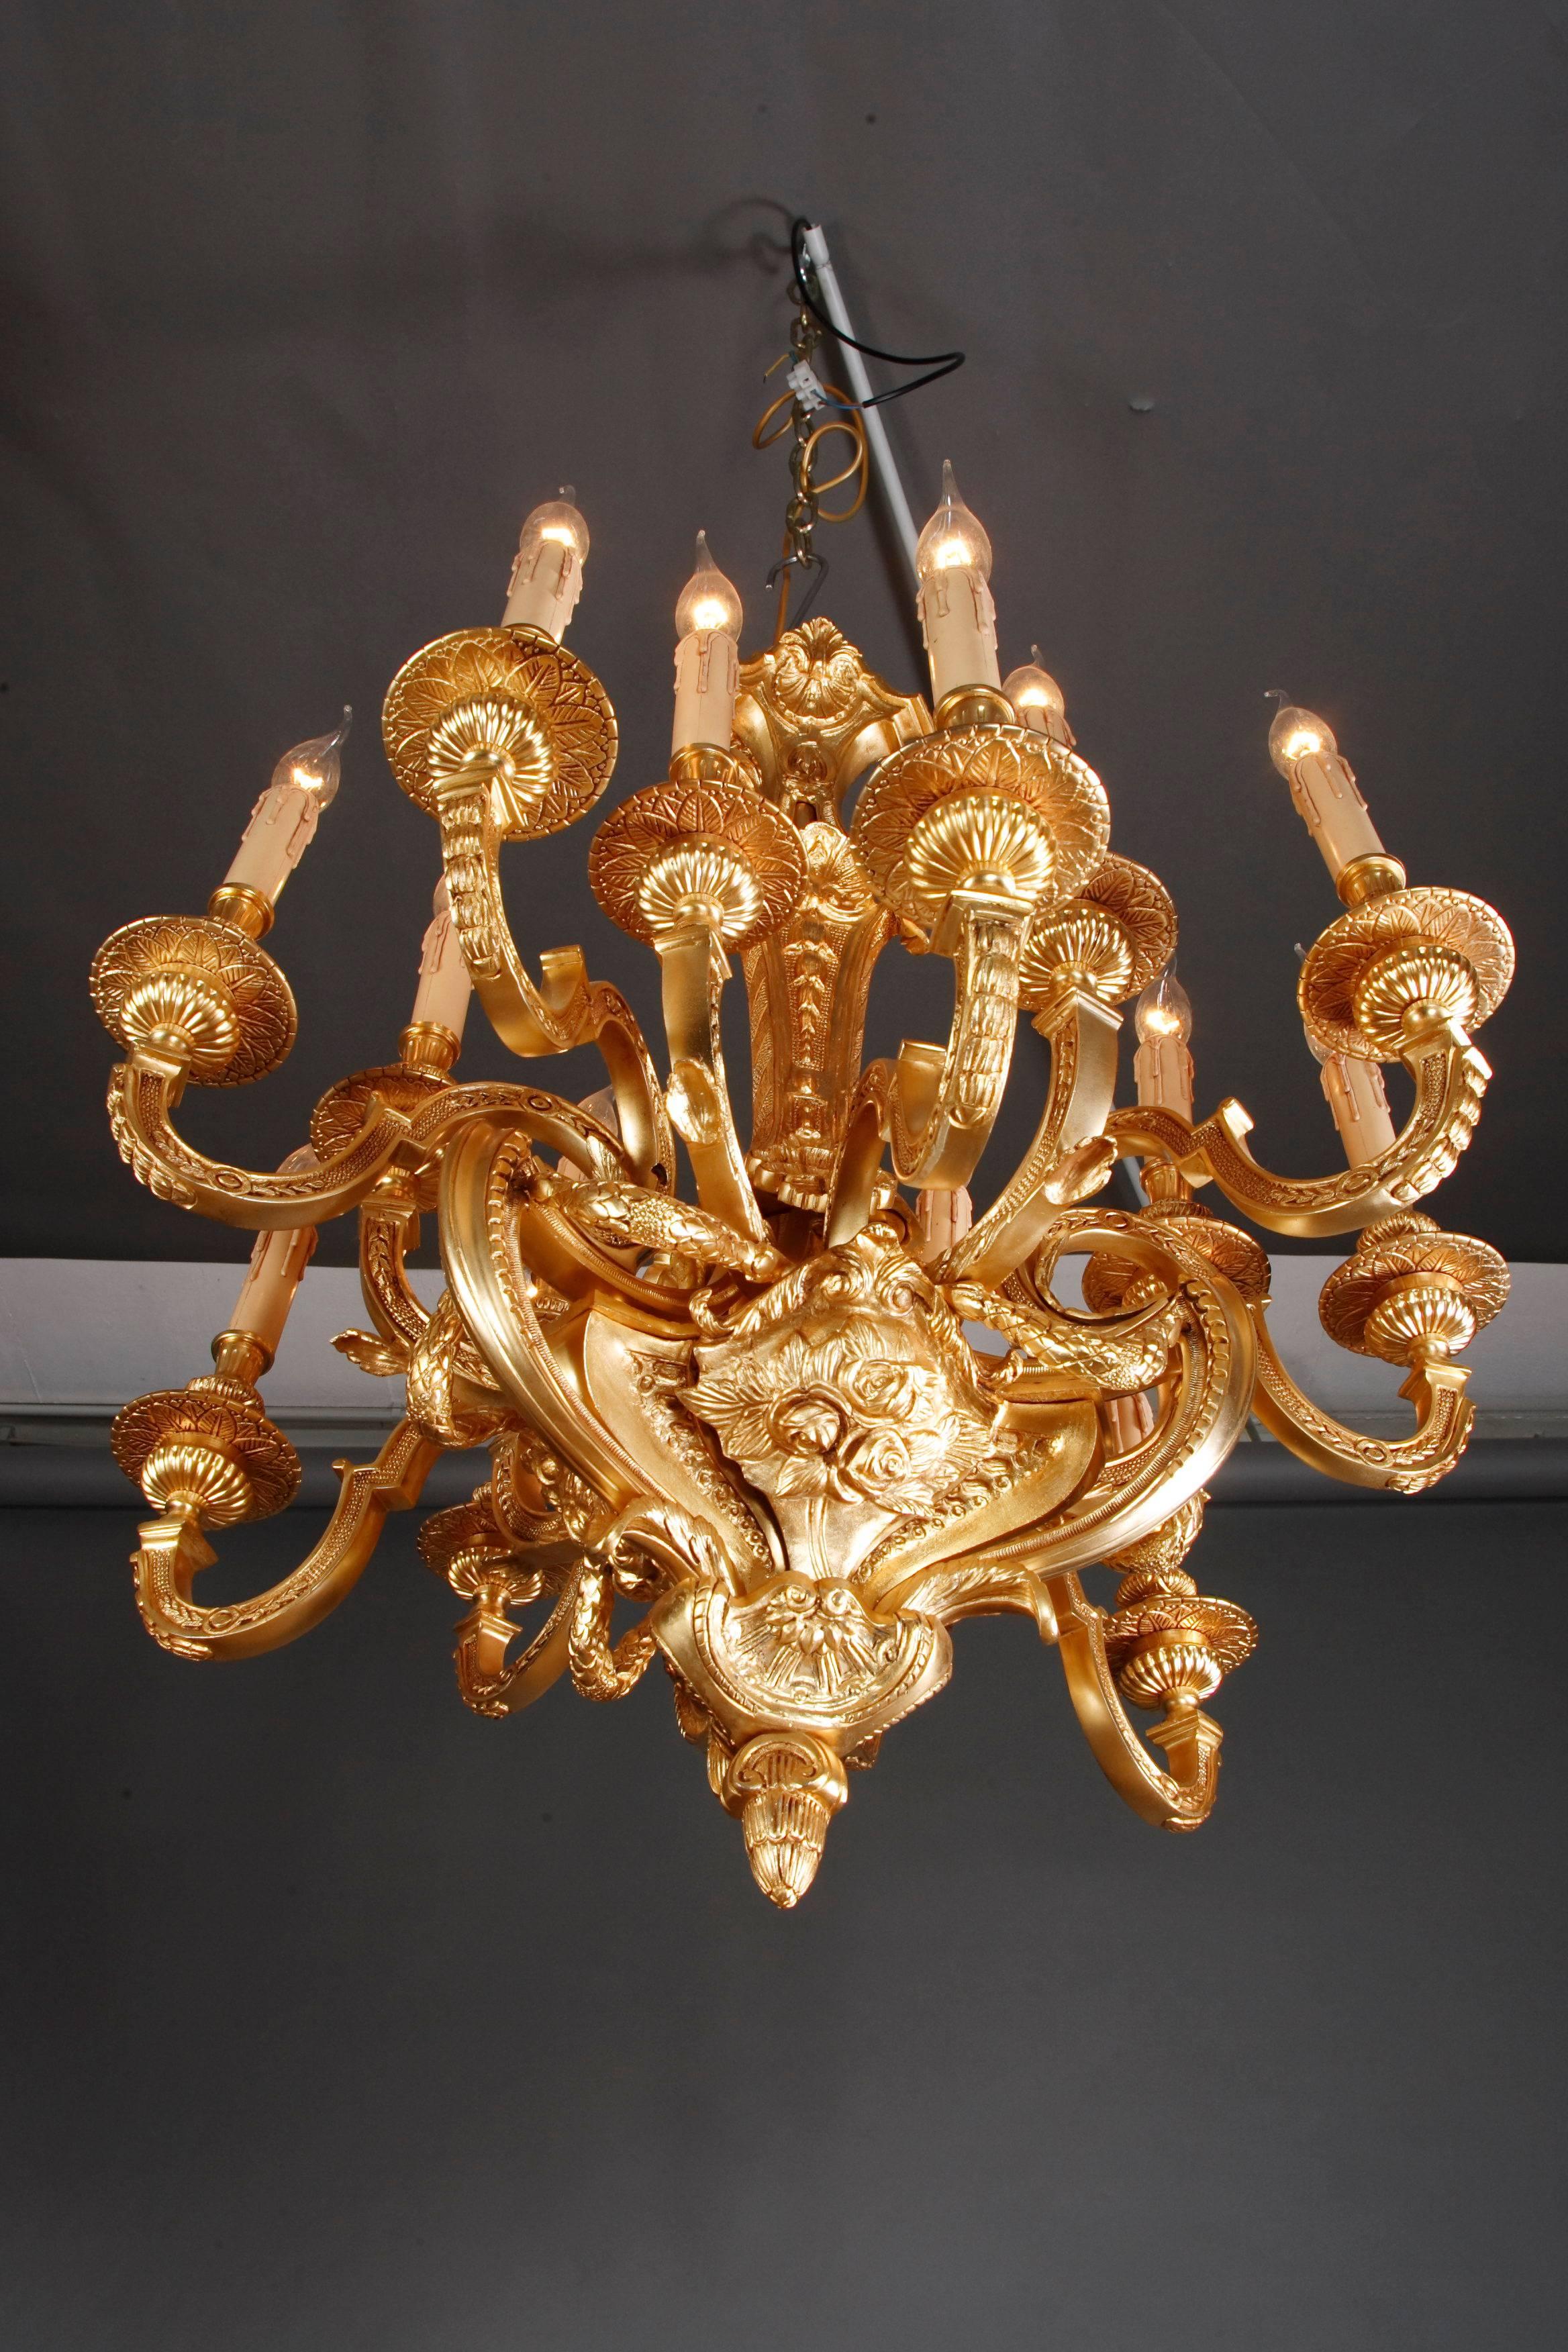 Ceiling candelabra in Louis XIV style.
Solid, engraved brass. Fifteen curved light arms.

(F-Kan-1).